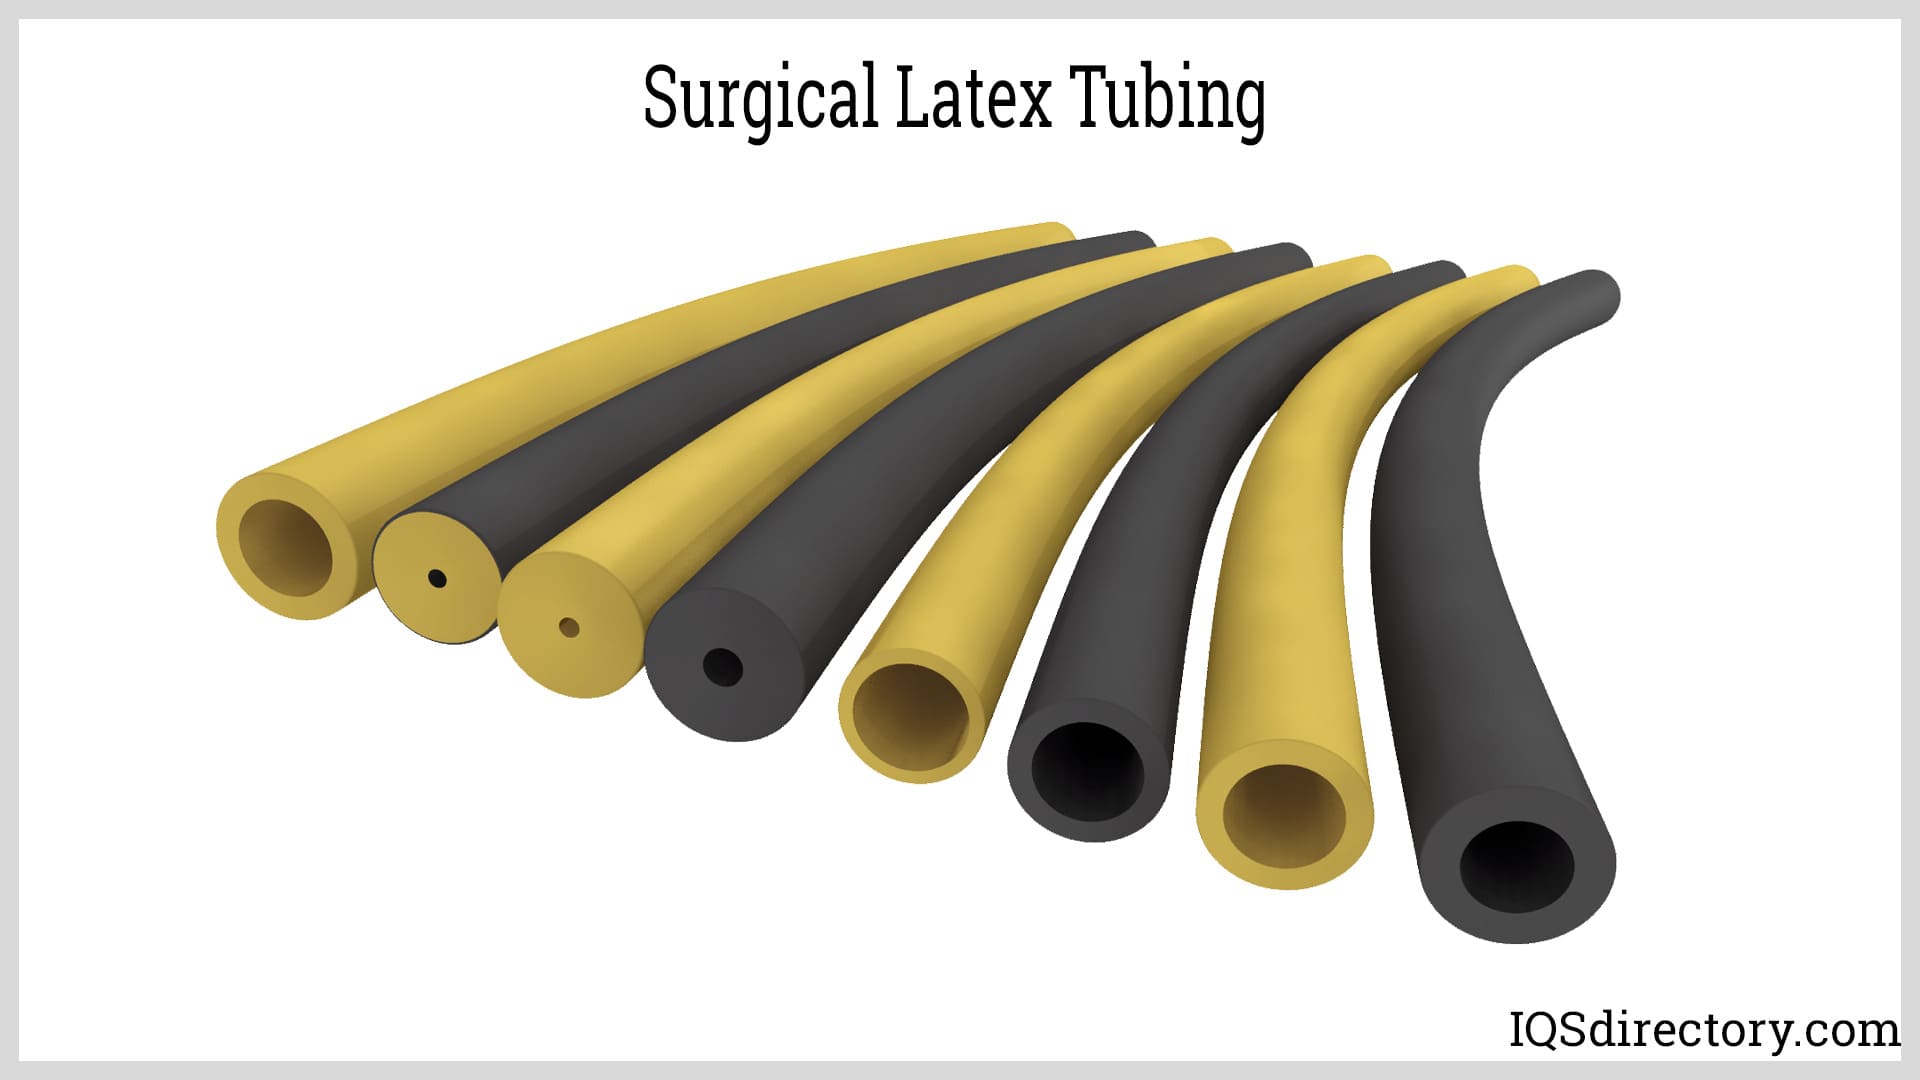 Surgical Latex Tubing